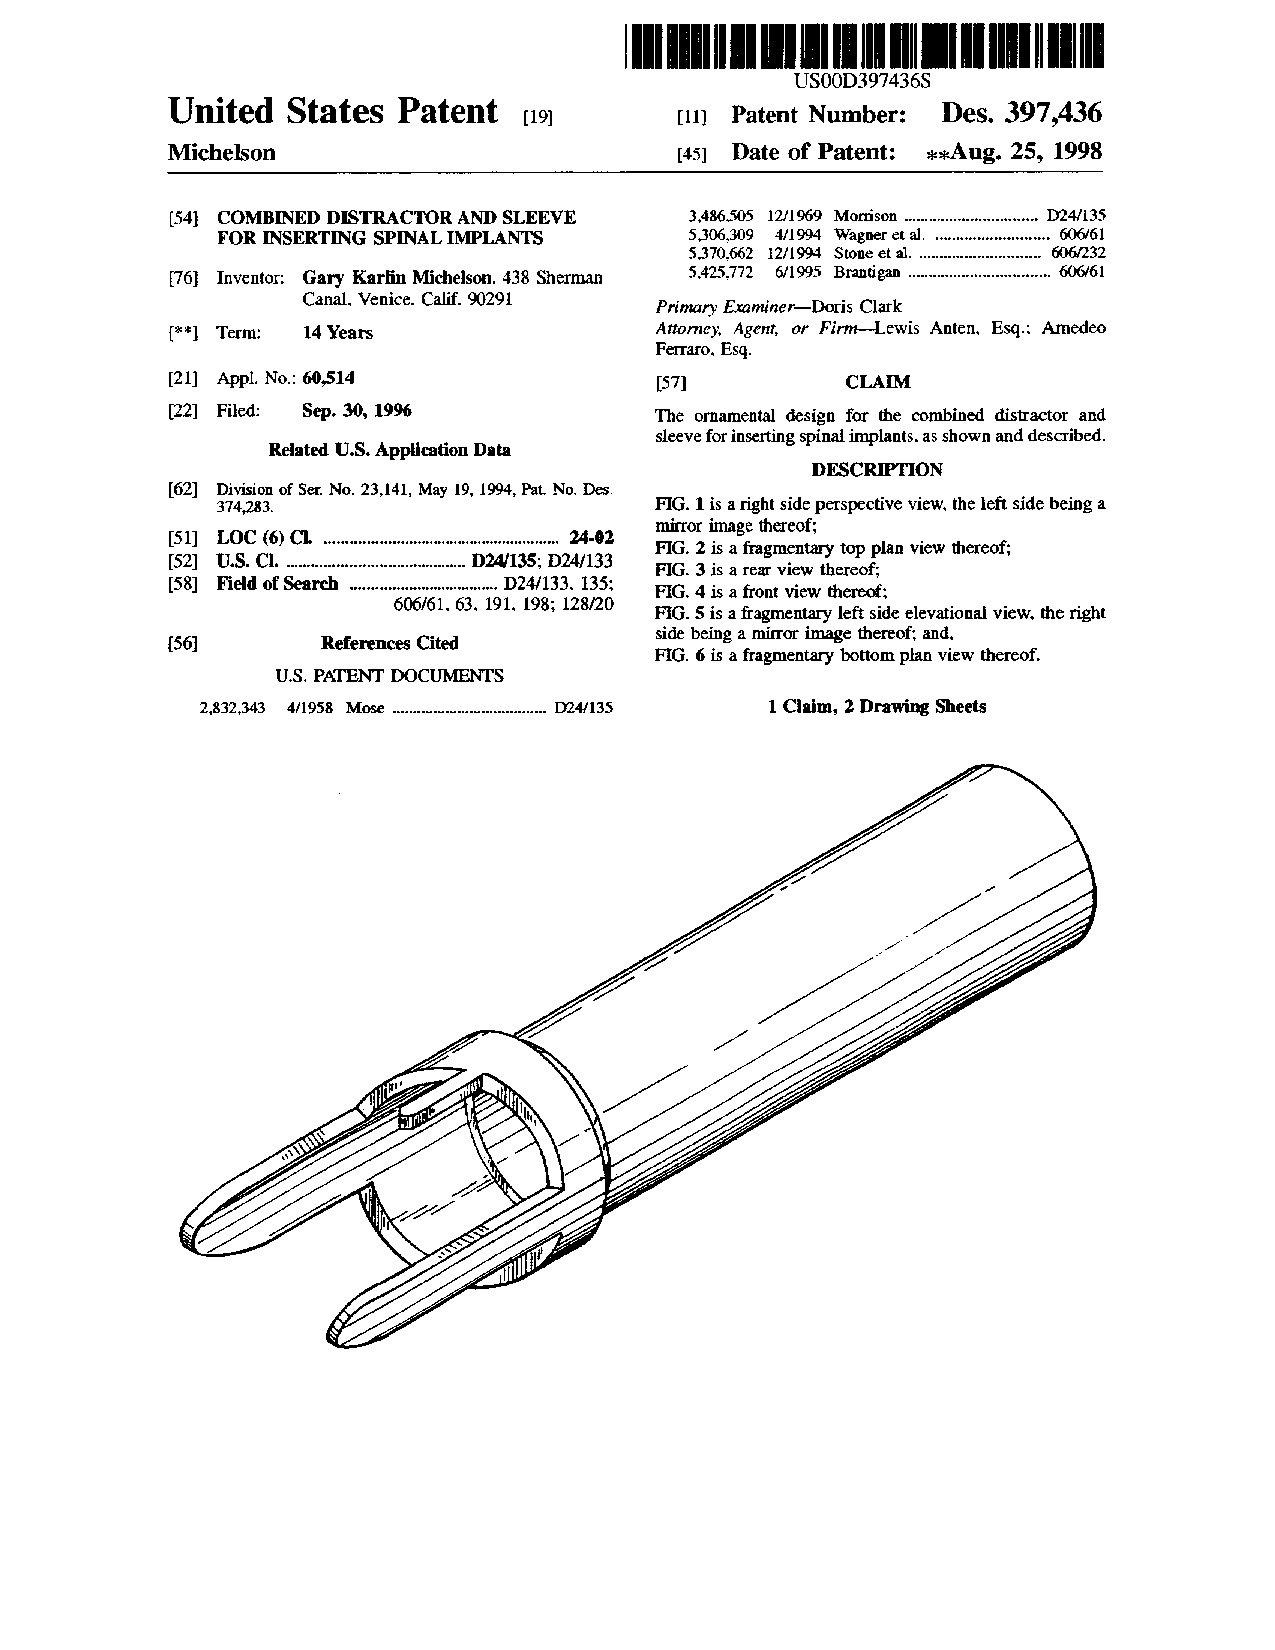 Combined distractor and sleeve for inserting spinal implants - Patent D397,436